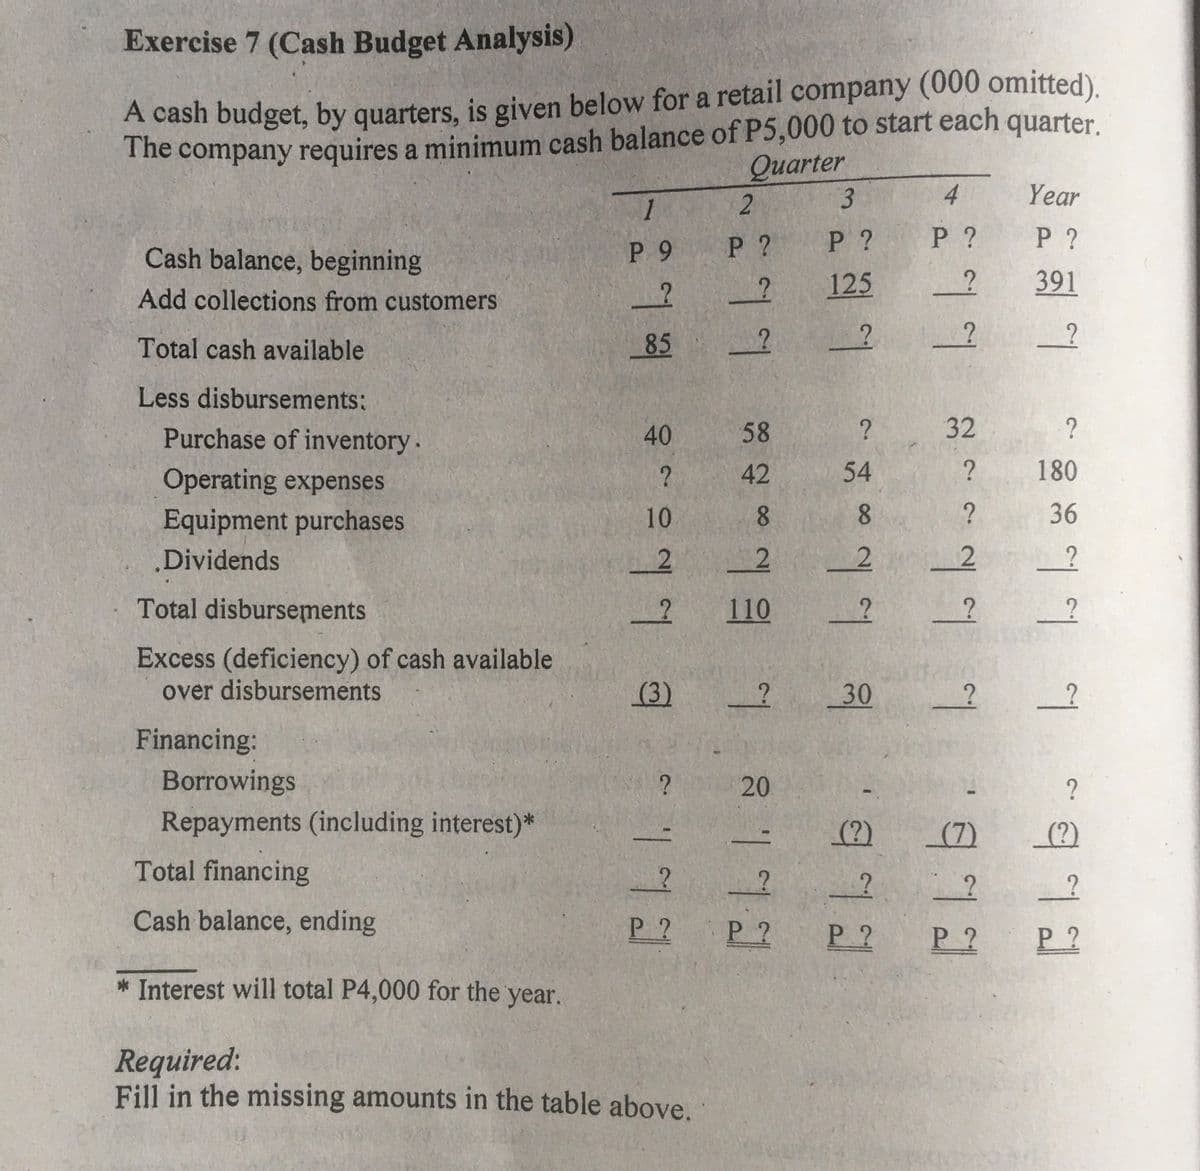 Exercise 7 (Cash Budget Analysis)
A cash budget, by quarters, is given below for a retail company (000 omitted).
The company requires a minimum cash balance of P5,000 to start each quarter.
Quarter
3
4
Year
Cash balance, beginning
P 9
P ?
P ?
P ?
P ?
125
391
Add collections from customers
Total cash available
85
_?
Less disbursements:
Purchase of inventory.
40
58
32
?
Operating expenses
42
54
180
Equipment purchases
10
8.
36
Dividends
Total disbursements
110
Excess (deficiency) of cash available
over disbursements
(3)
30
Financing:
Borrowings
? 20
?
Repayments (including interest)*
(?)
(7)
(?)
1.
Total financing
Cash balance, ending
P ? P ?
P 2
P 2
P 2
* Interest will total P4,000 for the year.
Required:
Fill in the missing amounts in the table above.
8
